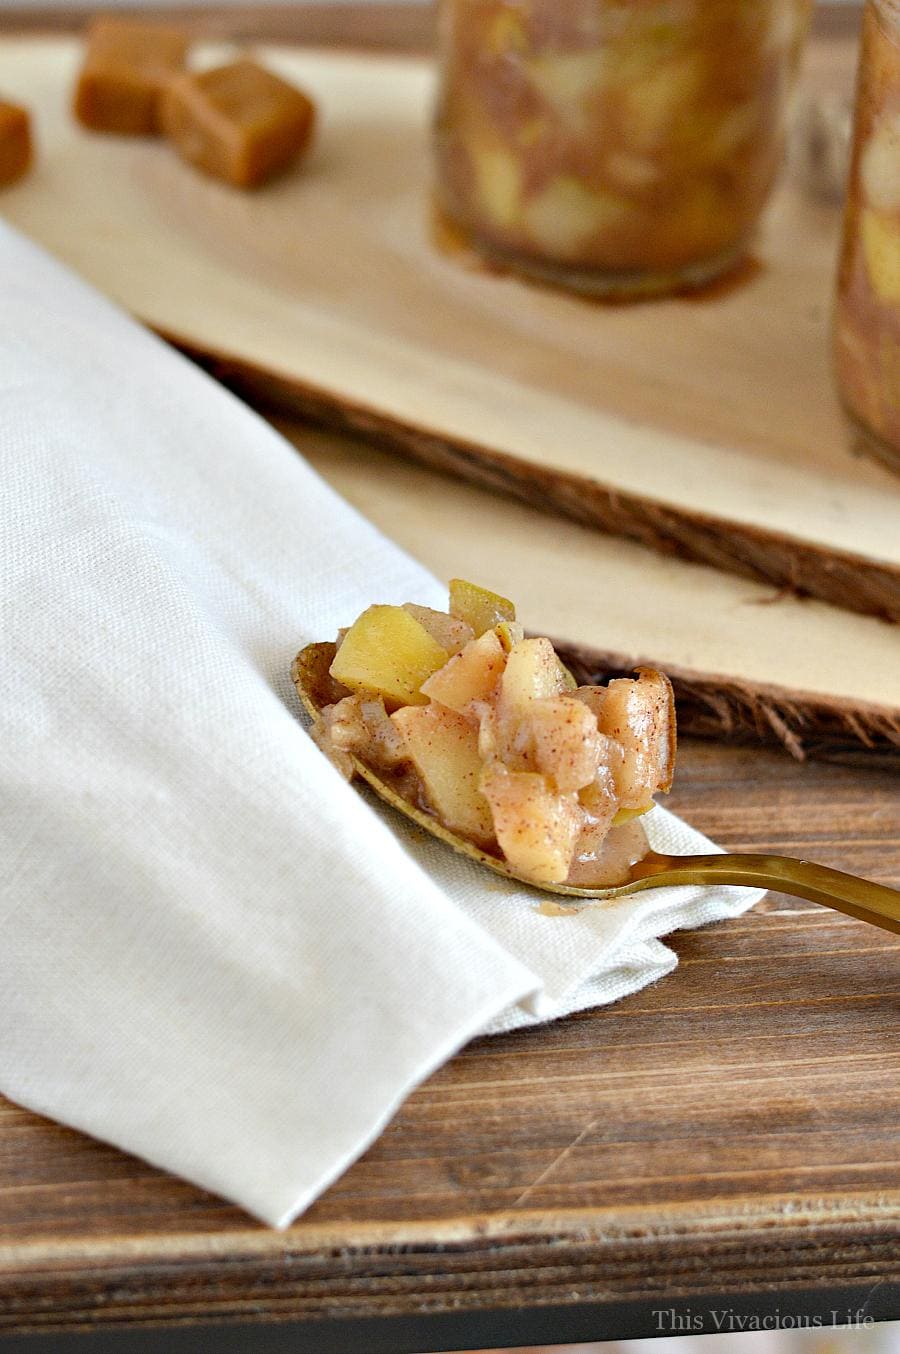 These gluten-free caramel apple pear mason jar pies are perfect for summer and especially for the 4th of July! They have all the summer flavors you love in personal size containers. Enjoy this dessert with minimal clean up at your next BBQ.